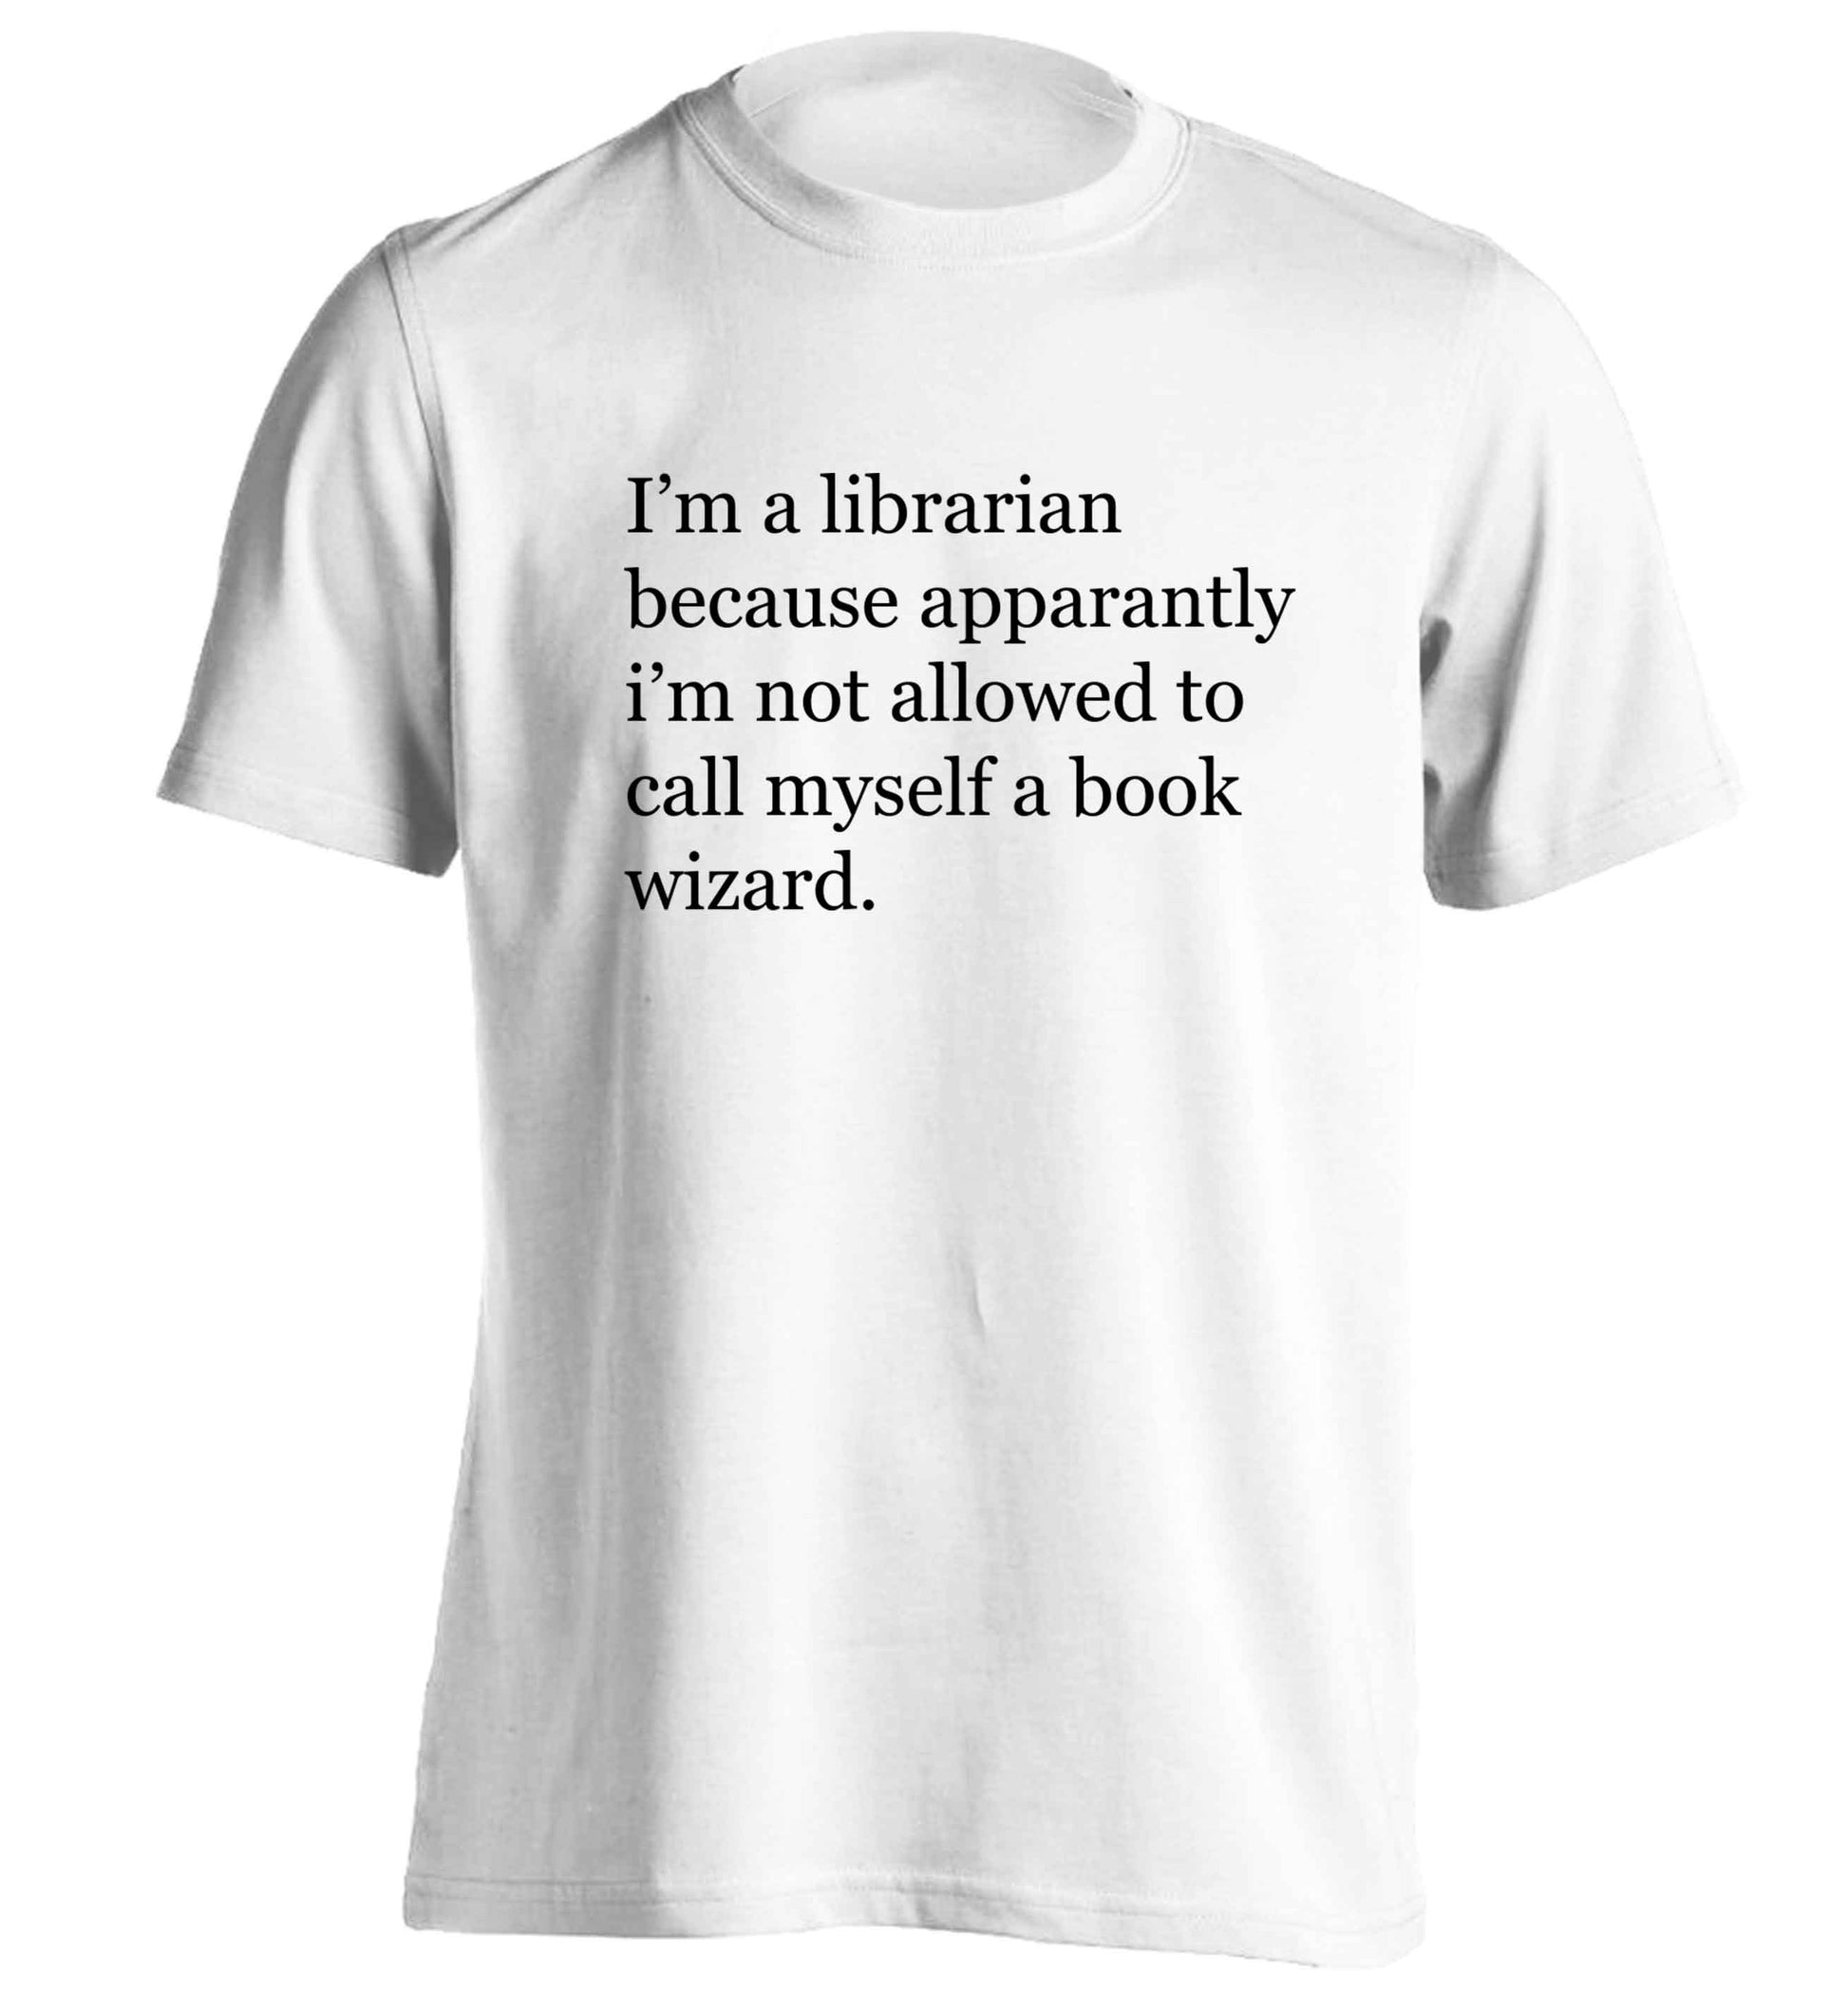 i√ïm a librarian because apparantly i√ïm not allowed to call myself a book wizard adults unisex white Tshirt 2XL